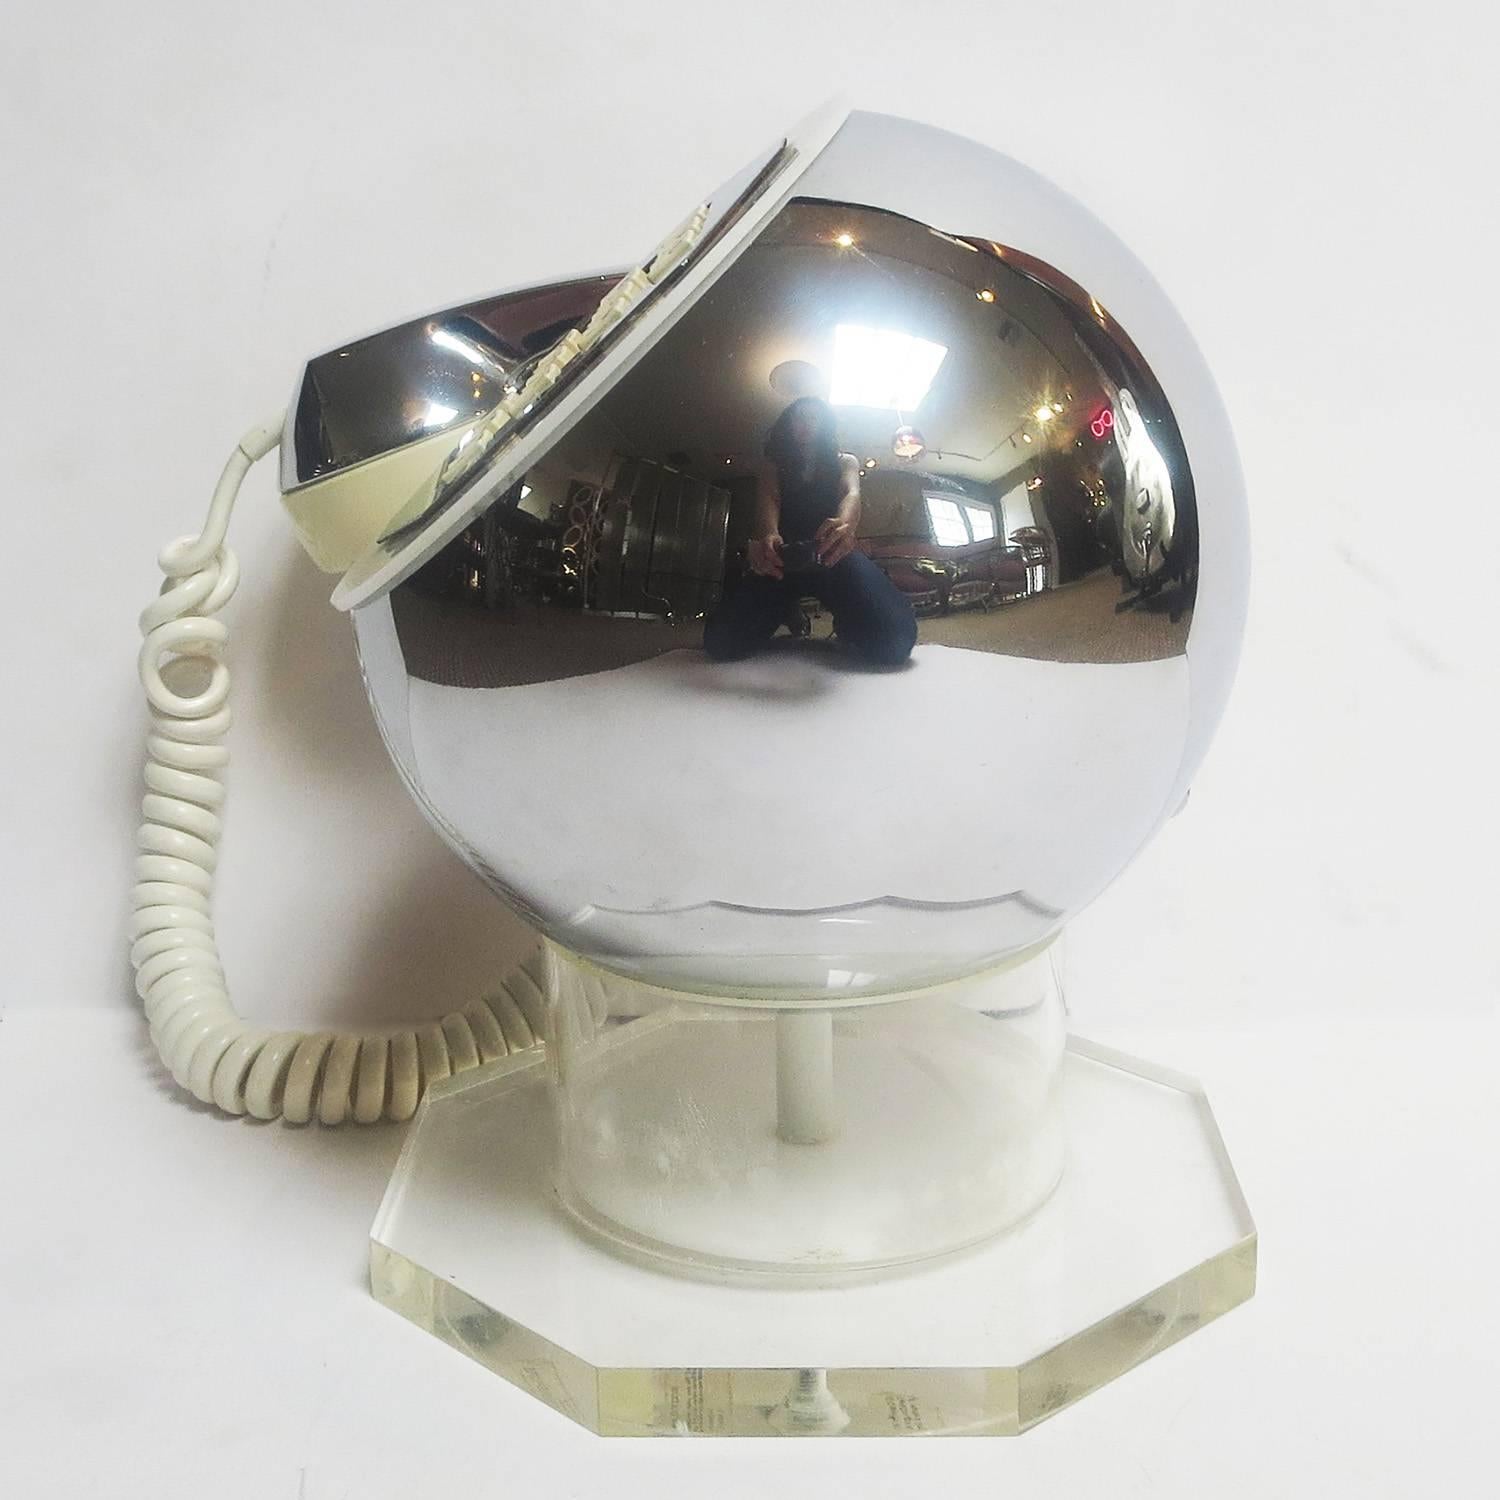 American Midcentury Lucite and Chrome Telephone by TeleConcepts Inc., 1977